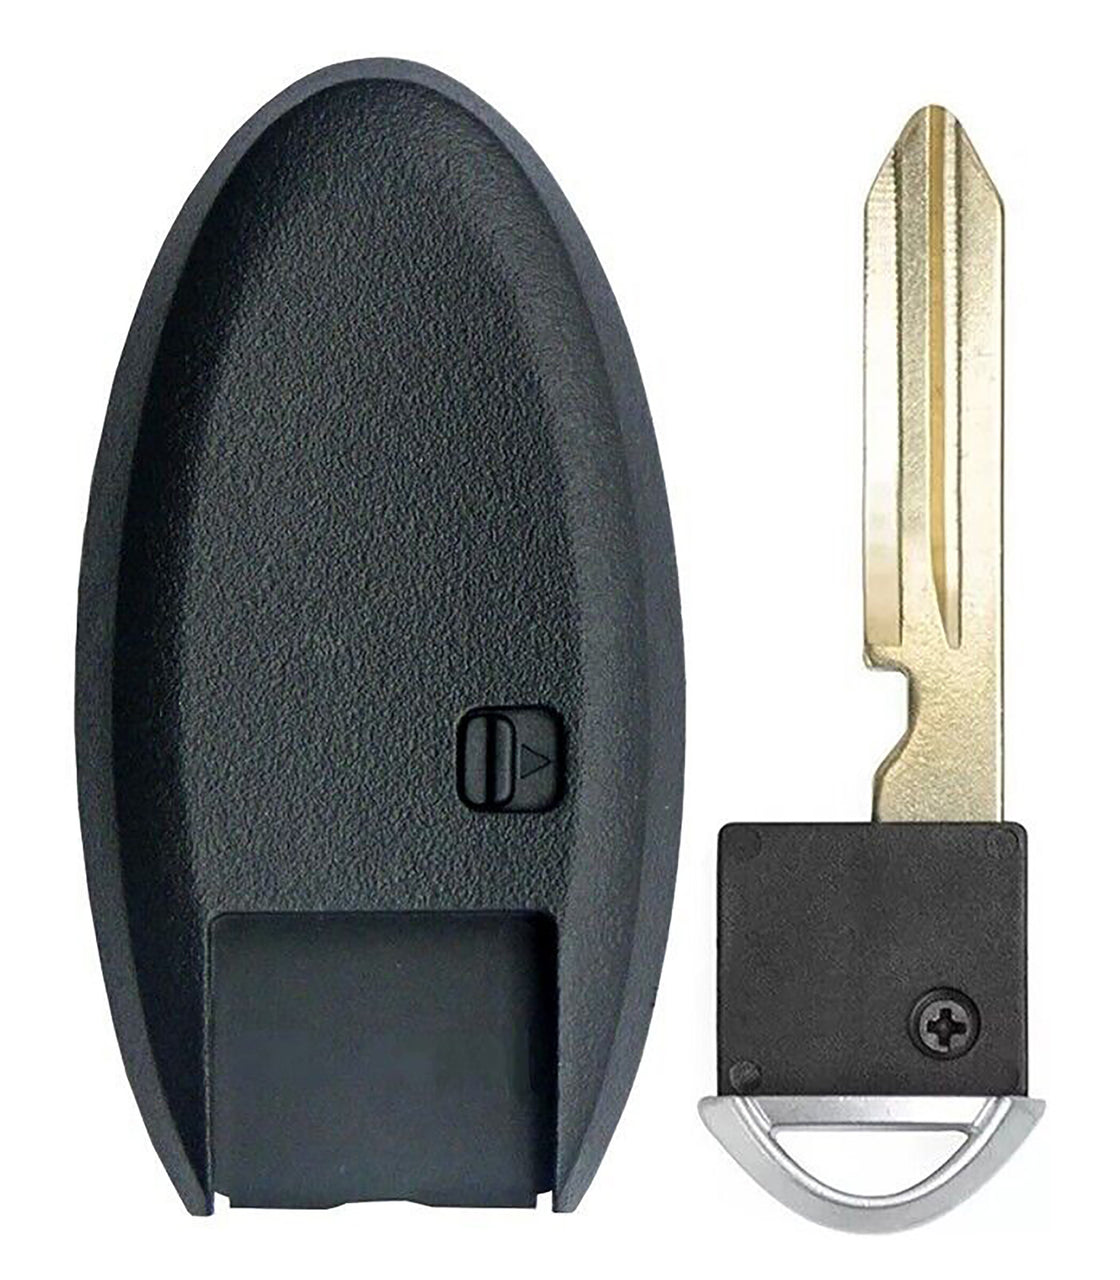 1x New Replacement Proximity Key Fob SHELL / CASE Compatible with & Fit For Nissan Infiniti - MPN KR5S180144014-106-06 (NO electronics or Chip inside)